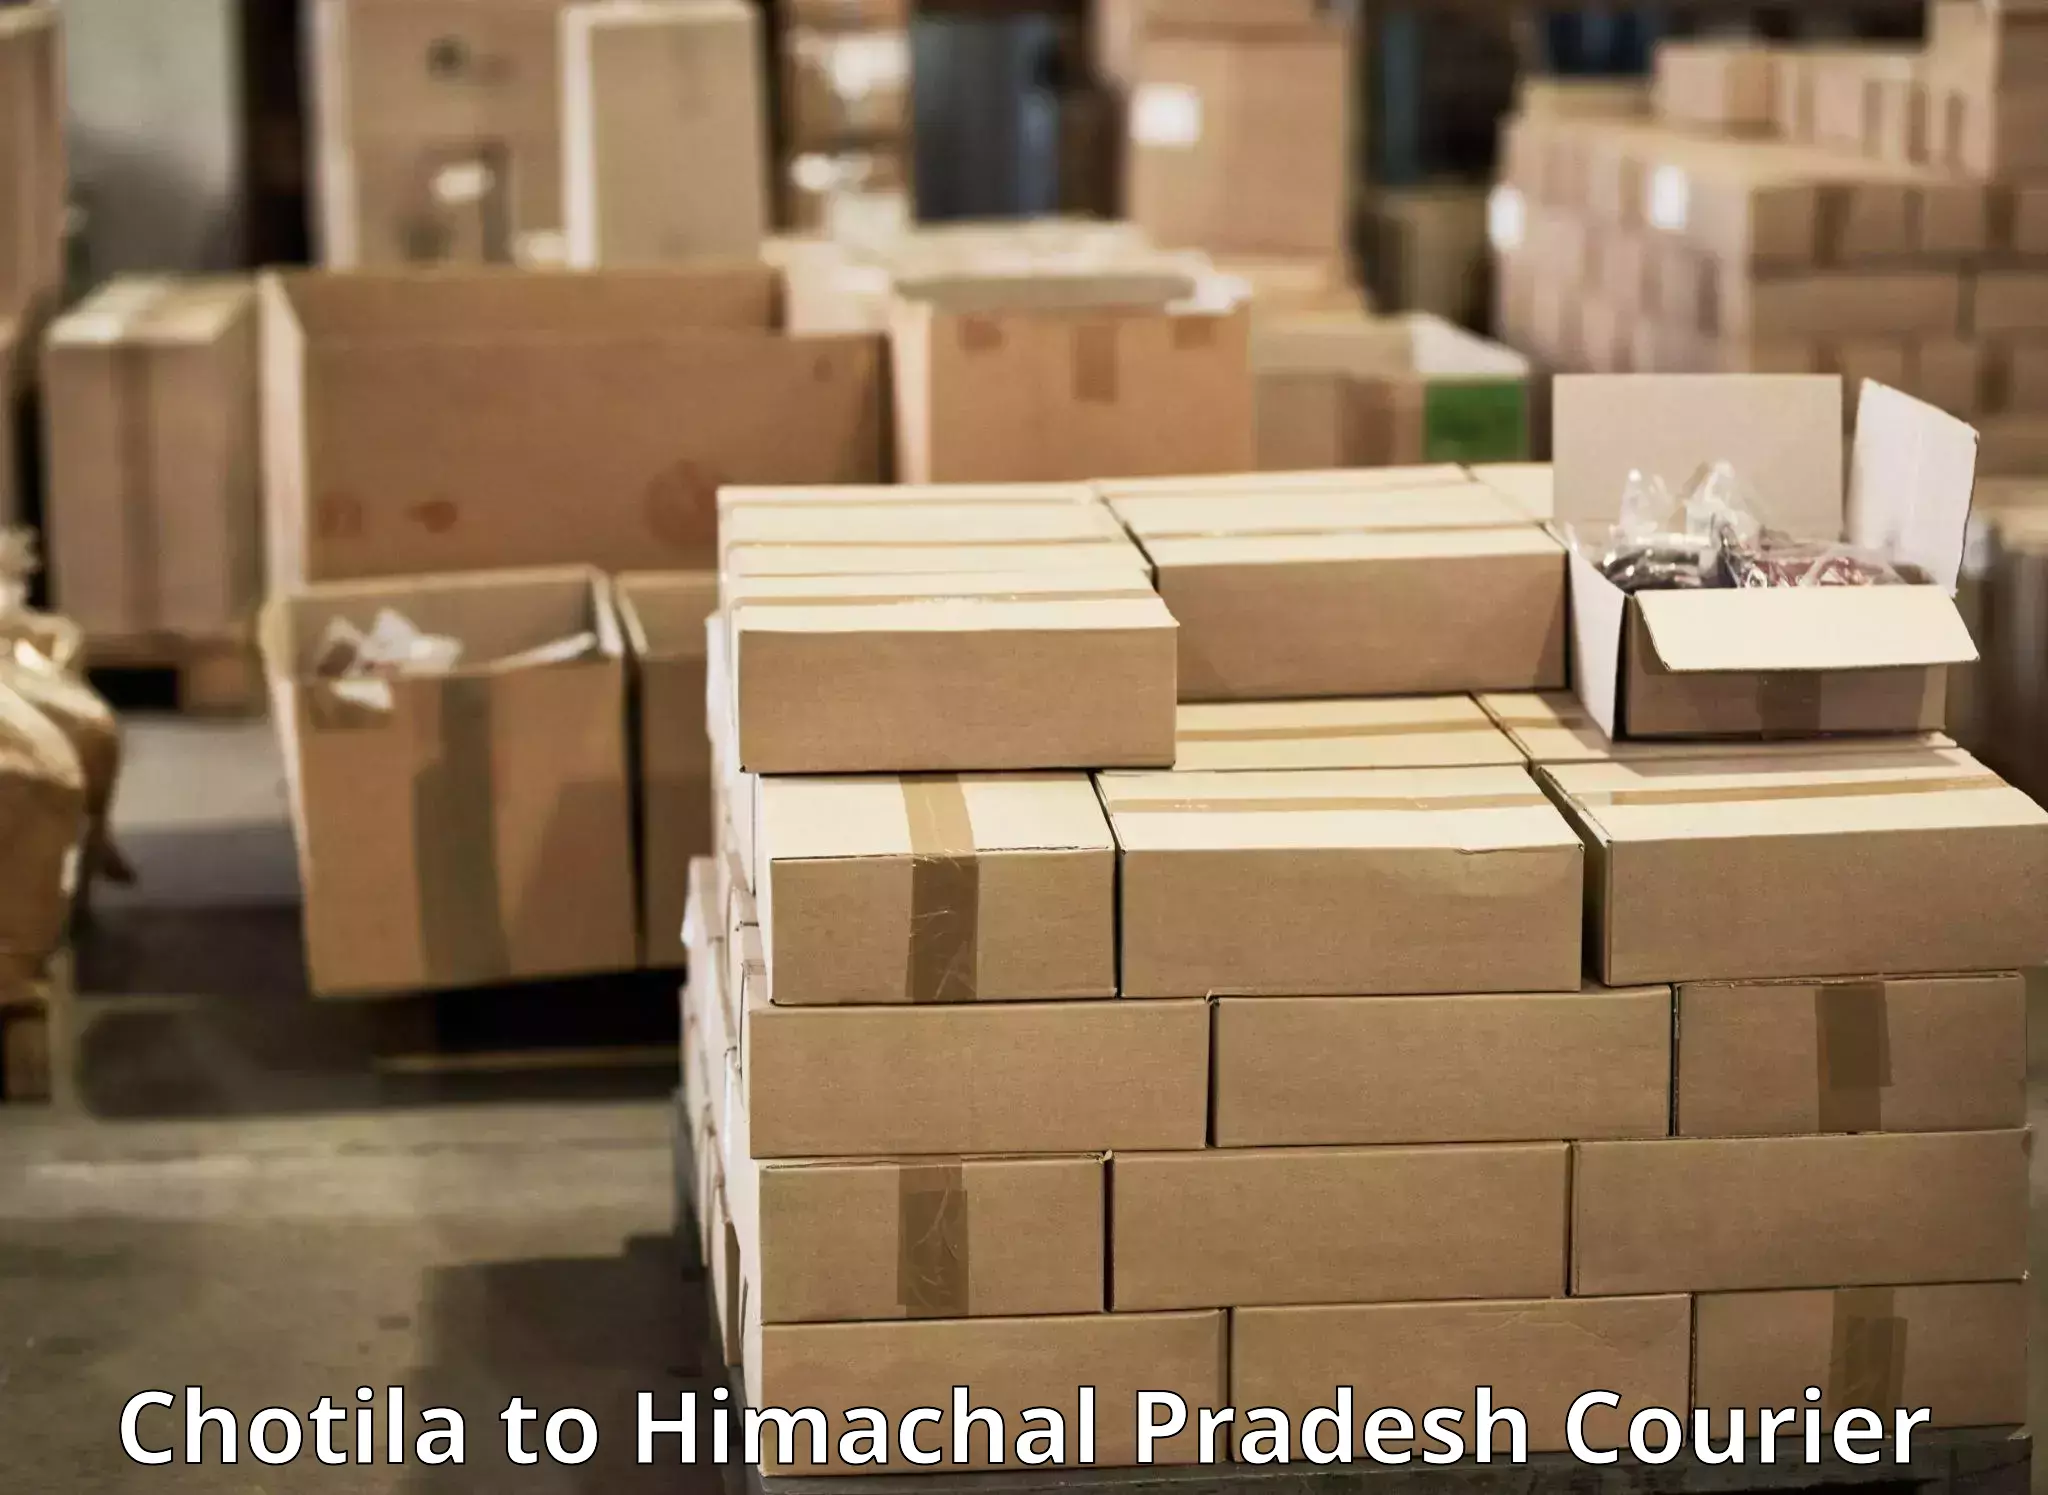 Express delivery solutions Chotila to Waknaghat